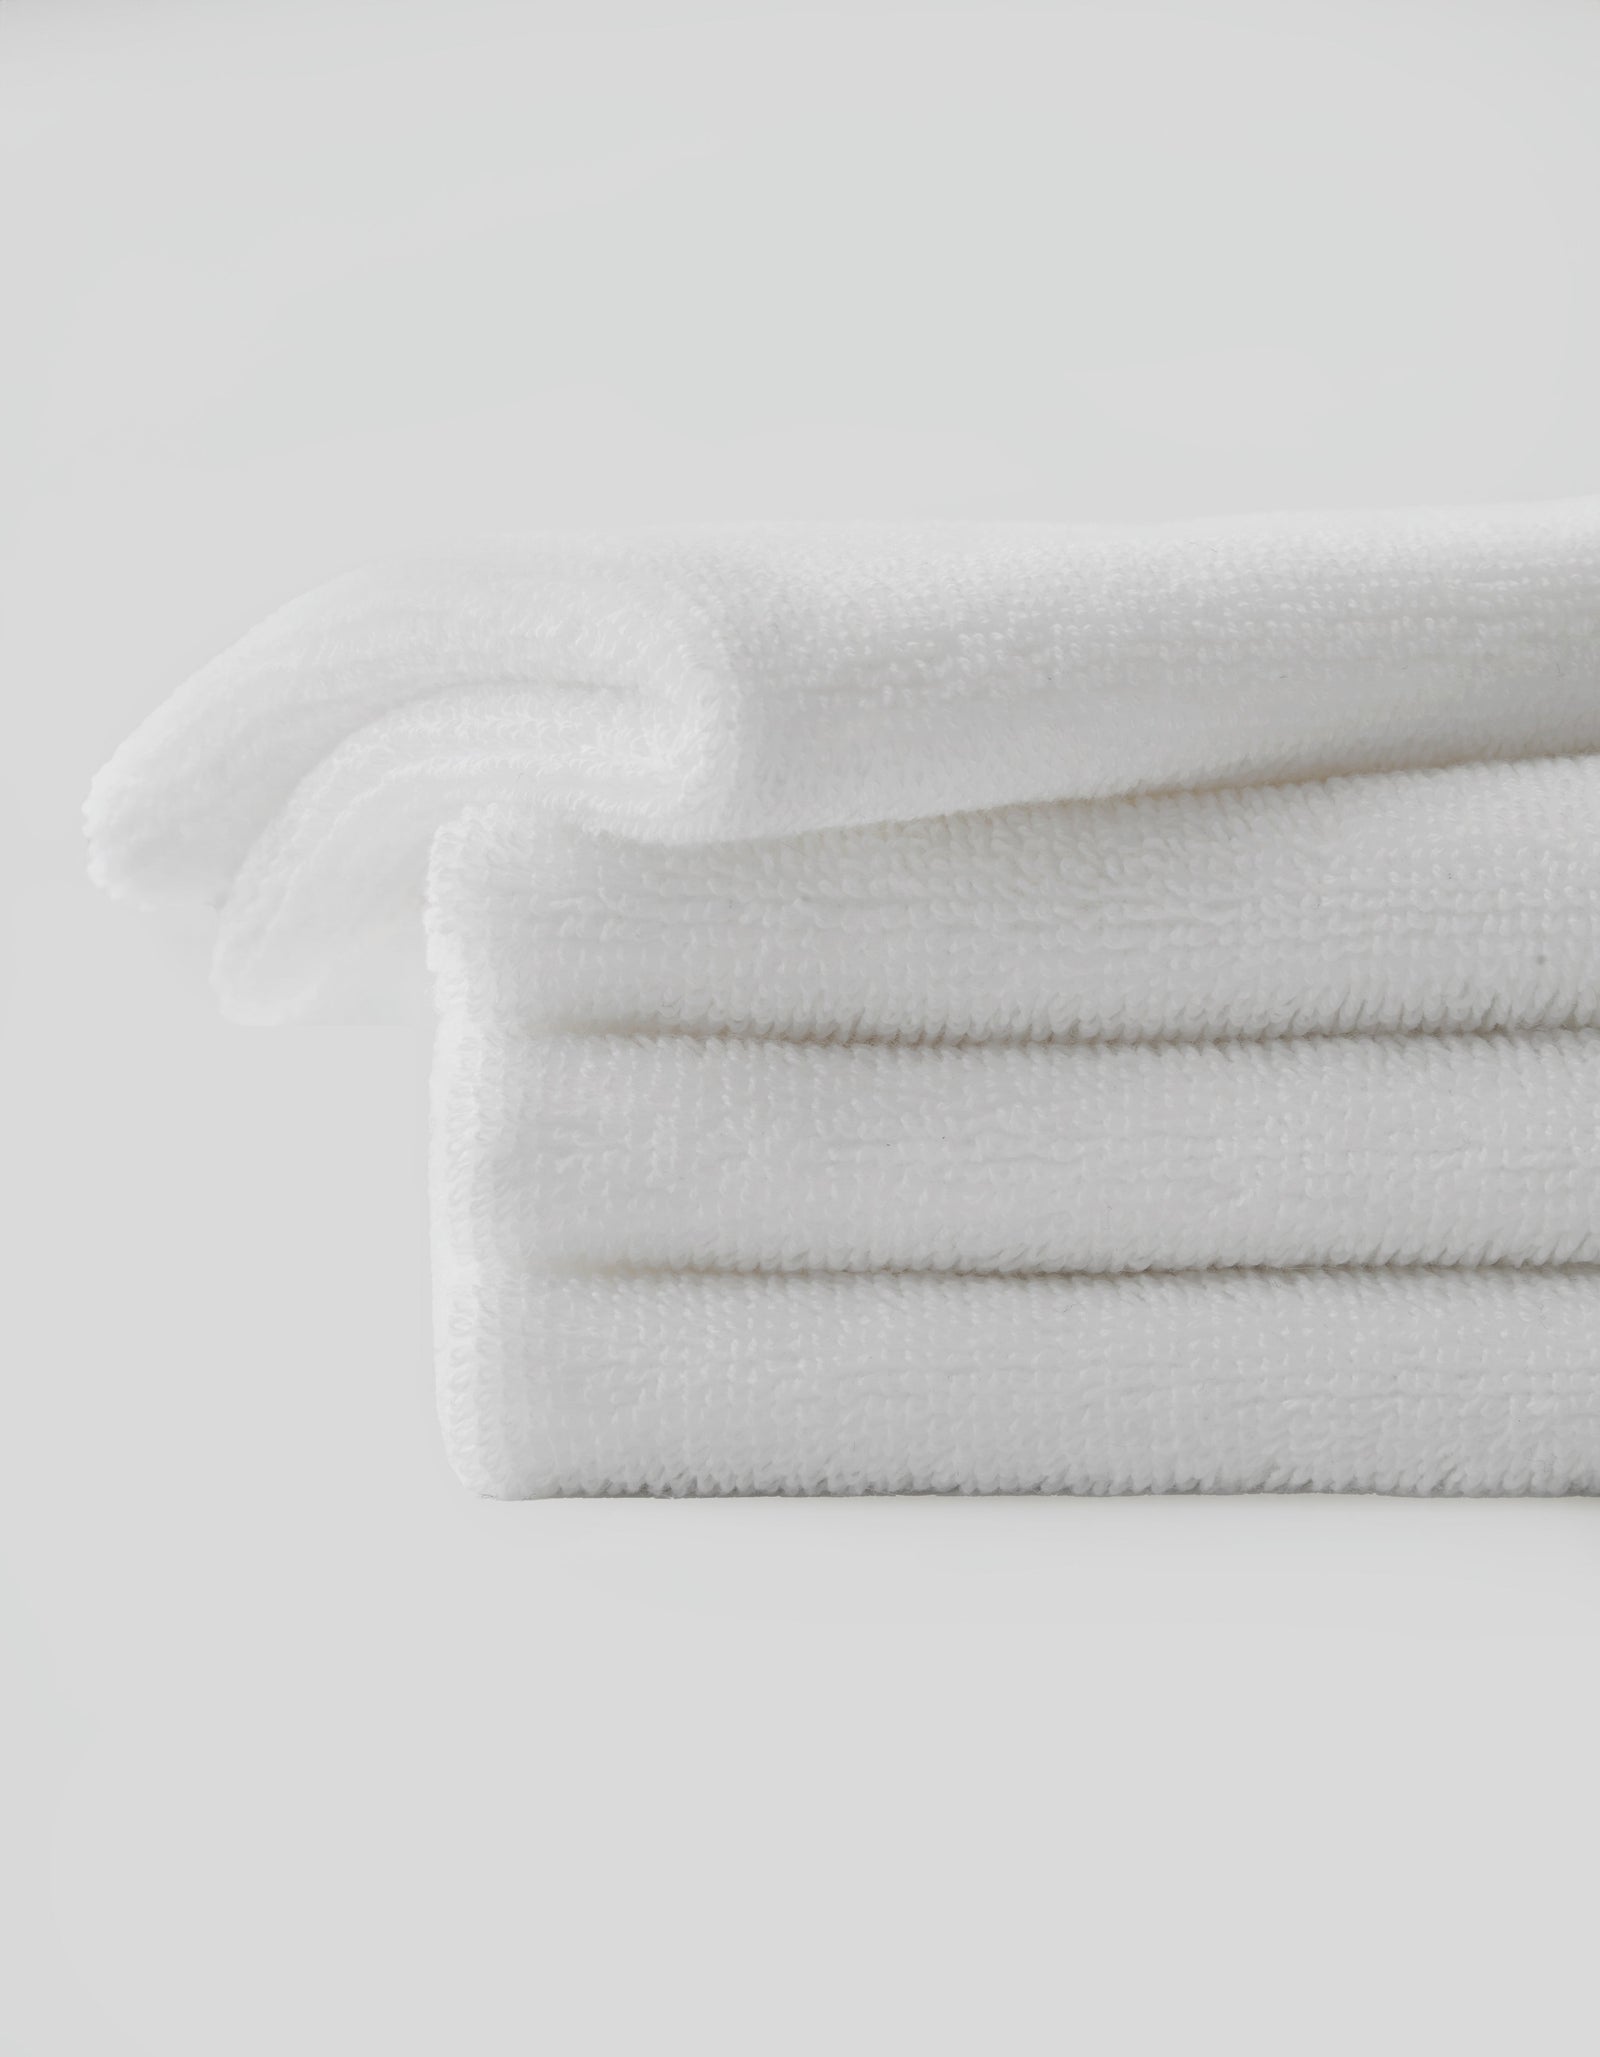 A stack of three neatly folded Complete Cleansing Cloths by Cozy Earth is placed against a plain white background. The white cloths appear soft and fluffy, suggesting a clean and fresh appearance. The overall image conveys a sense of cleanliness and simplicity.